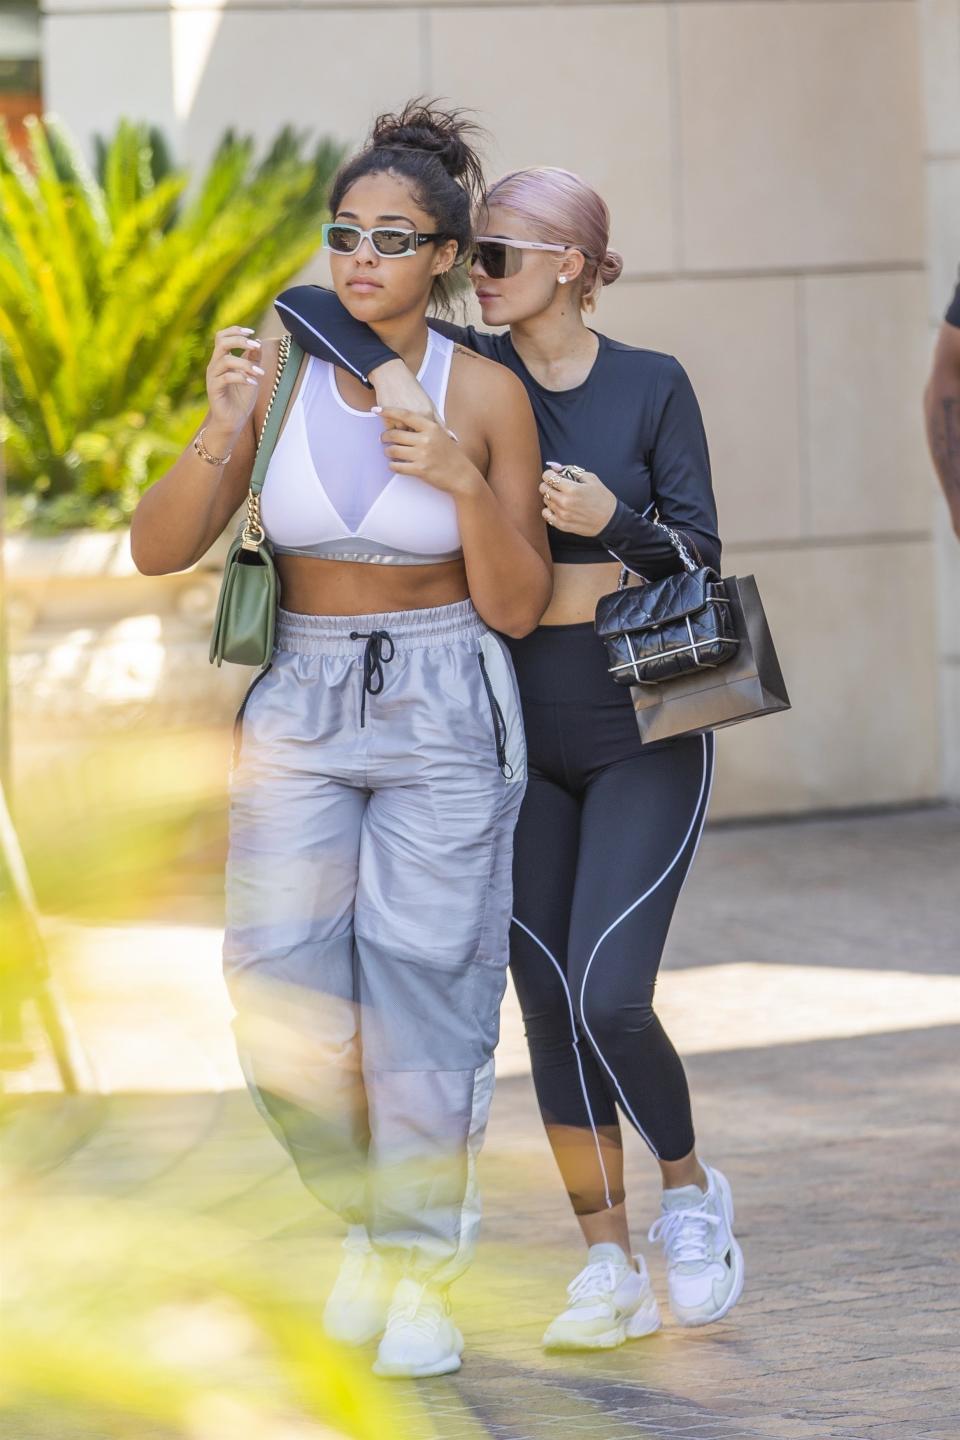 Calabasas, CA  - EXCLUSIVE  - Pink hair - don't care! Make-up free Kylie Jenner out curved her million dollar Lamborghini in workout attire and pink hair while jewelry shopping with her BFF Jordyn Woods. Kylie also sported a fistfull of gold rings on her left hand that spelled out STORM on her fingers.Pictured: Kylie Jenner, Jordyn WoodsBACKGRID USA 24 SEPTEMBER 2018 BYLINE MUST READ: IXOLA / BACKGRIDUSA: +1 310 798 9111 / usasales@backgrid.comUK: +44 208 344 2007 / uksales@backgrid.comUK Clients - Pictures Containing ChildrenPlease Pixelate Face Prior To Publication